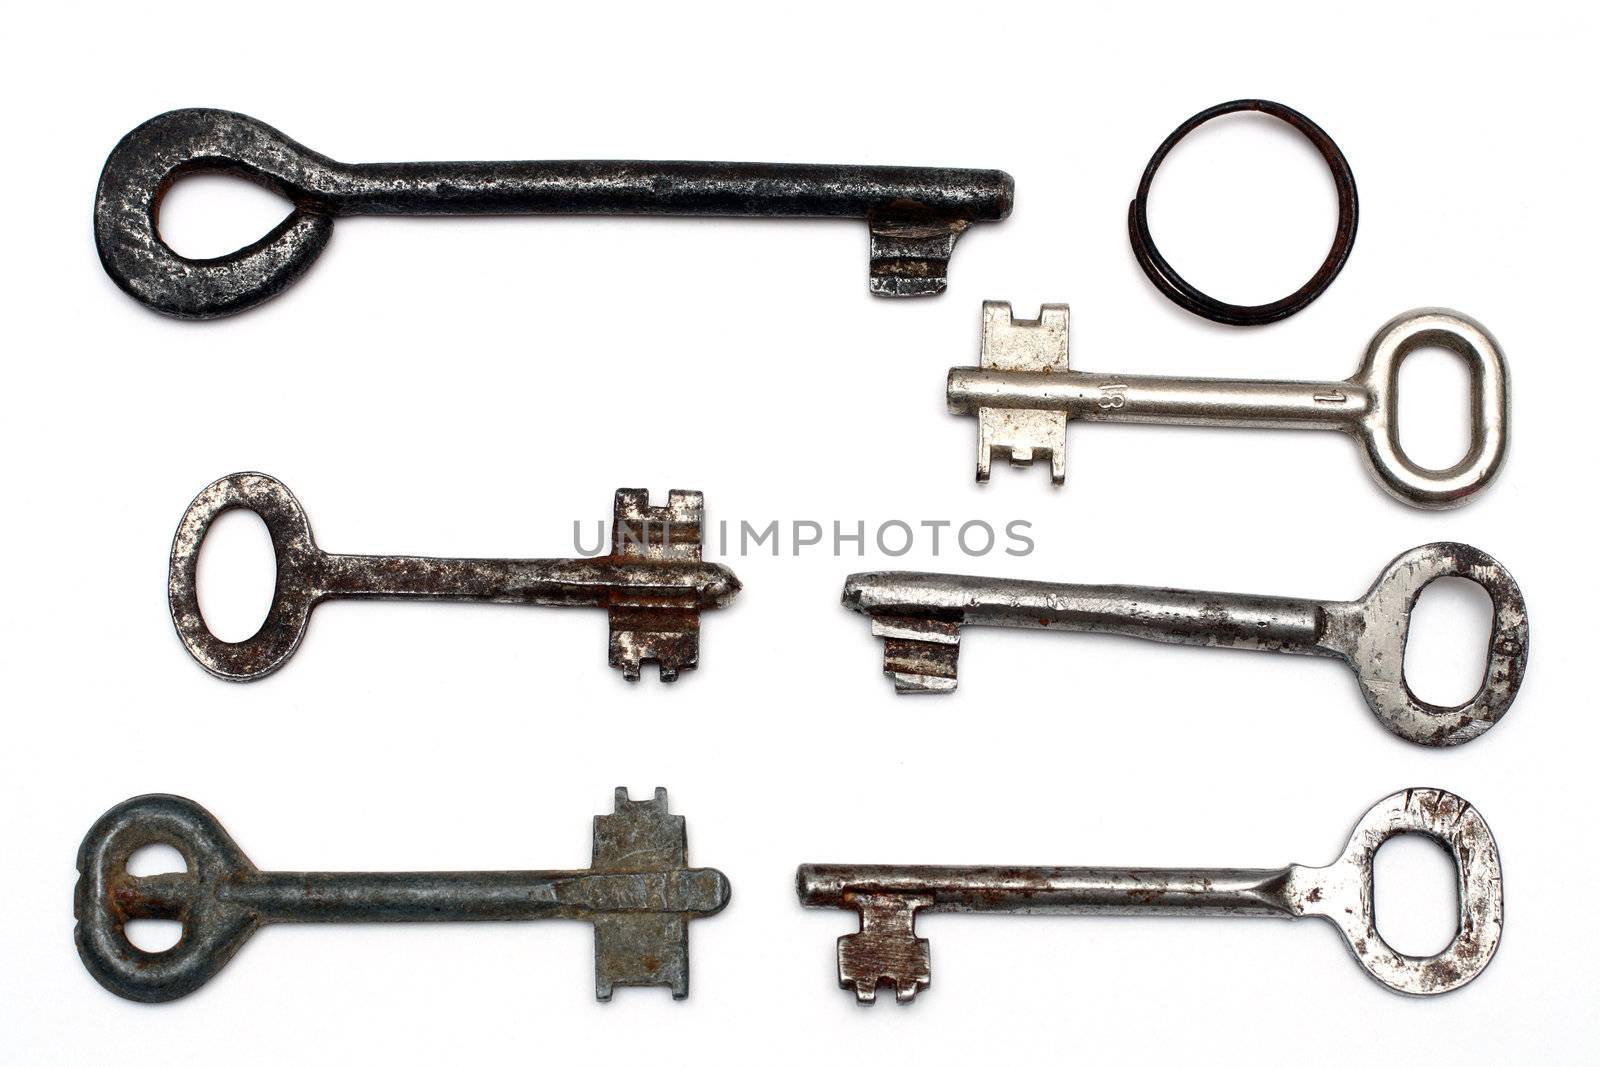 six old rusty keys and keyring isolated on white